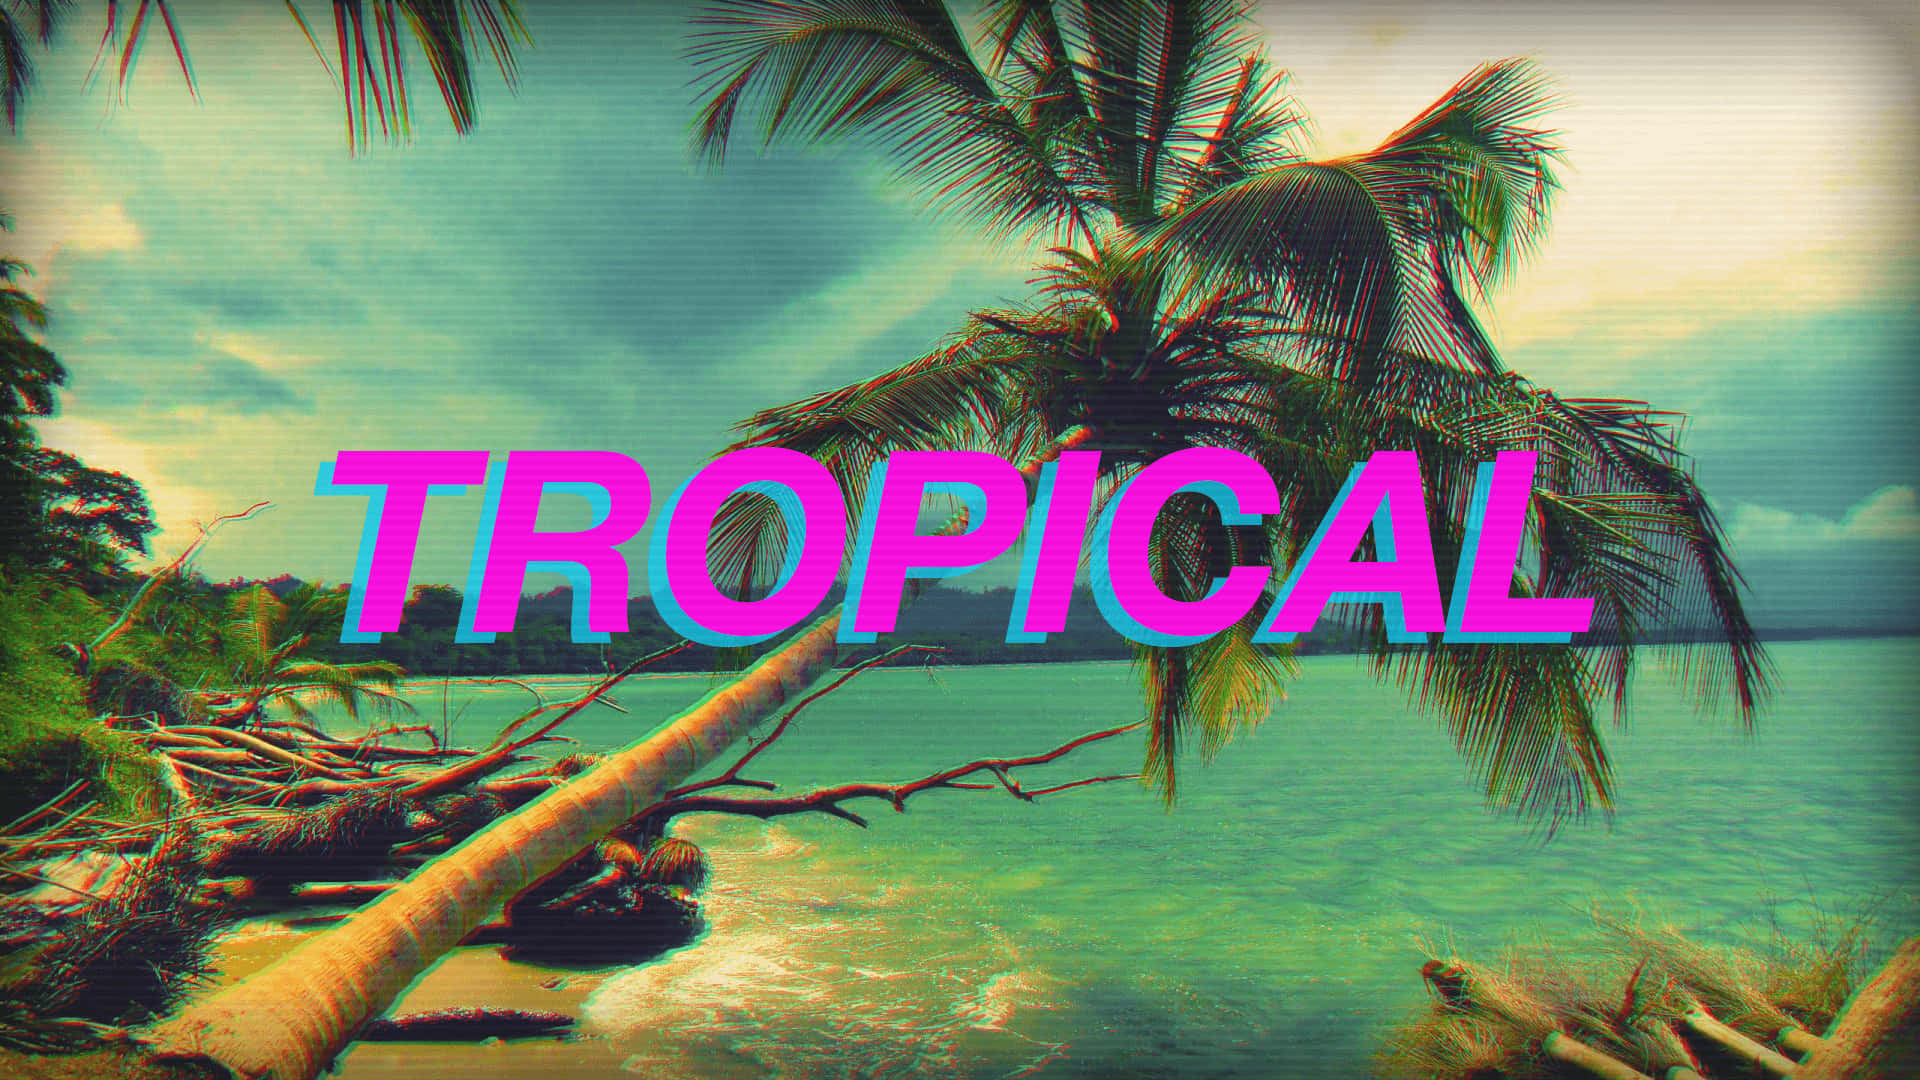 Download A Person Enjoying the Beauty of an Aesthetic Tropical Scene ...